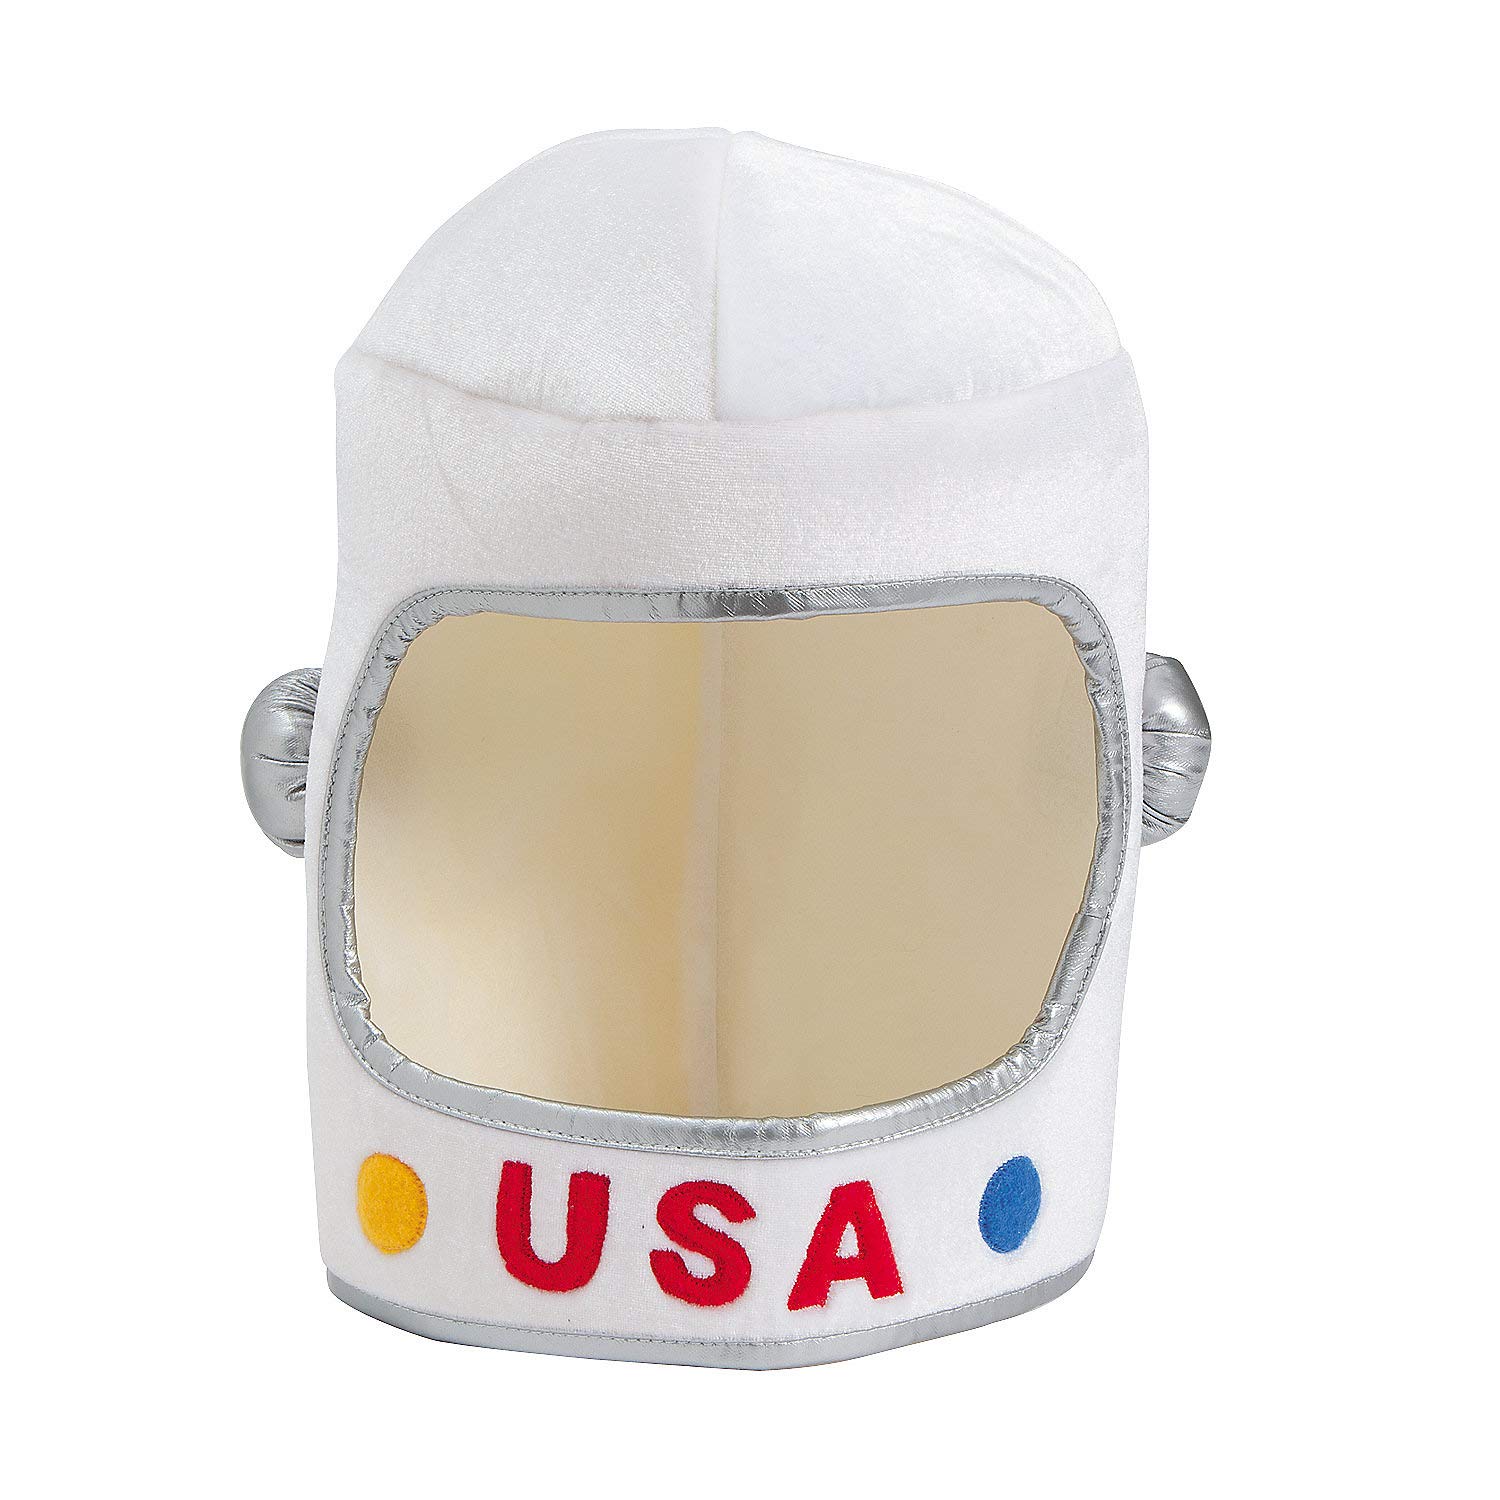 Book Cover Fun Express Astronaut Helmet (fits both kids and pets) Space Costume and Play Accessory